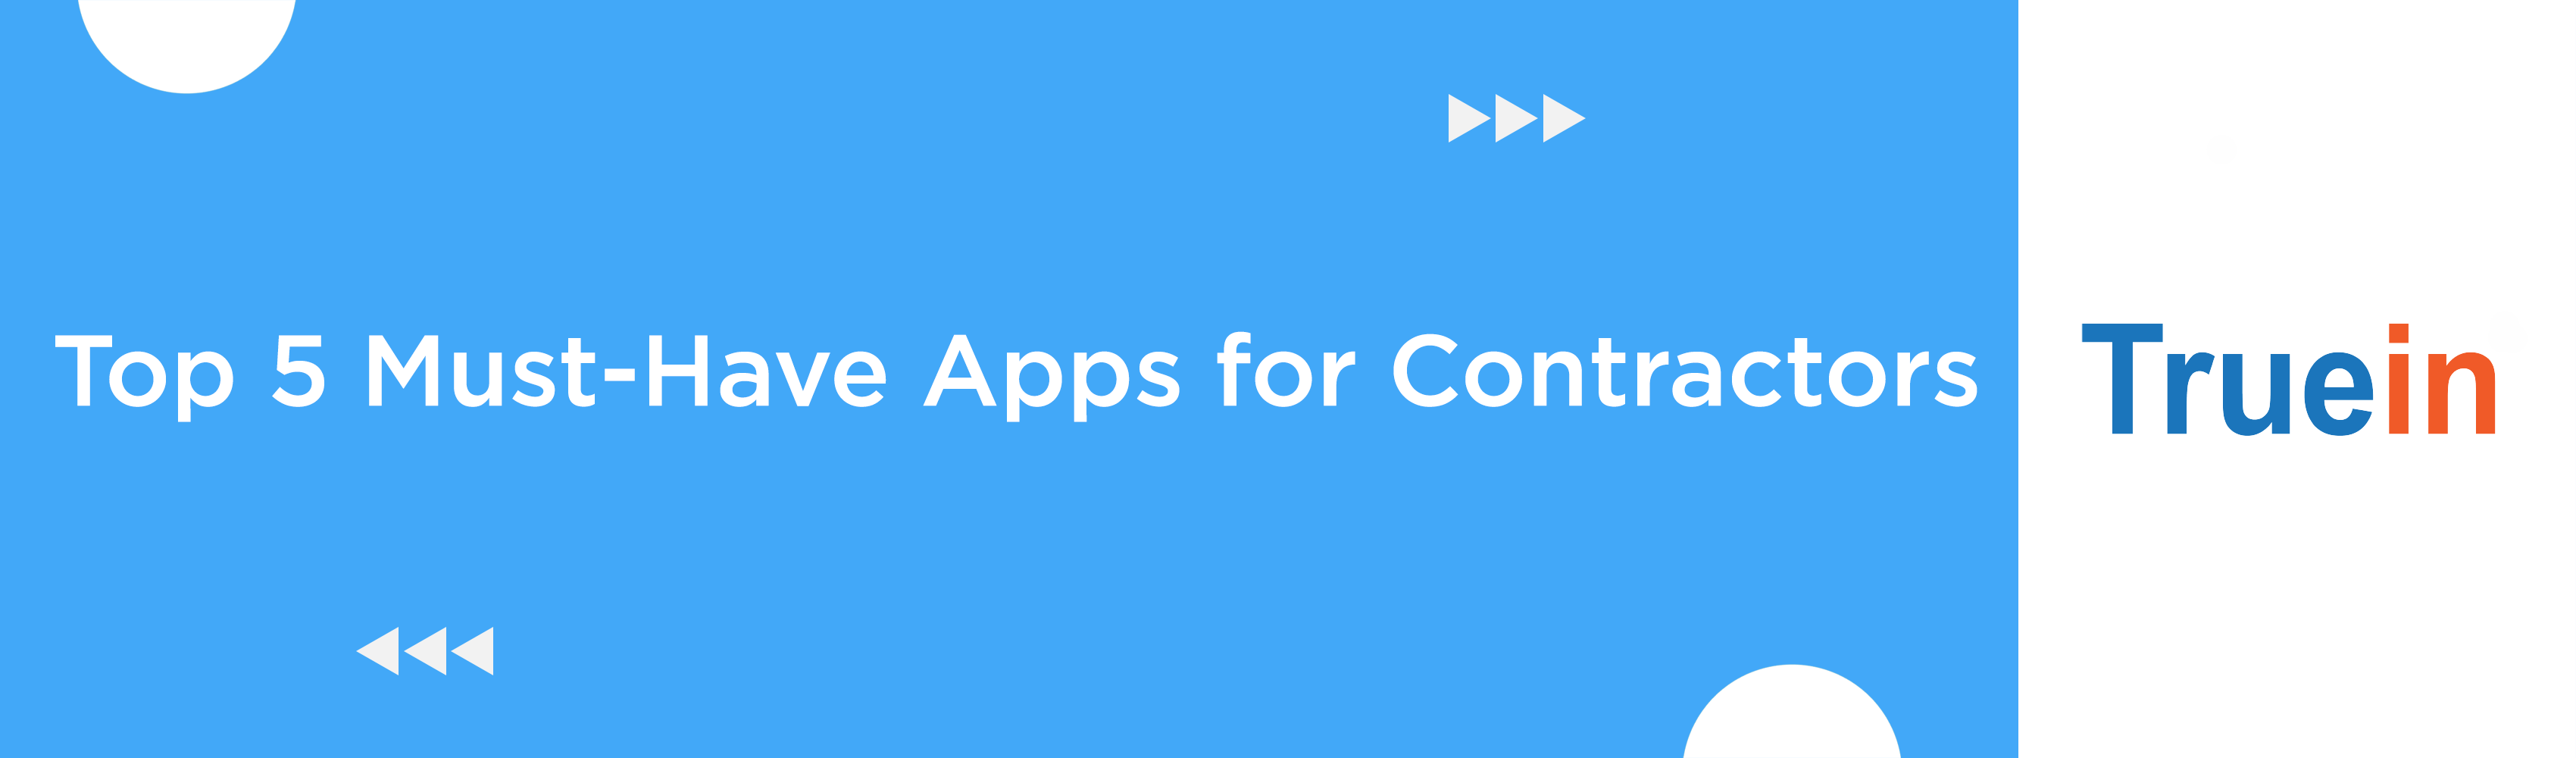 Top 5 Must-Have Apps for Contractors